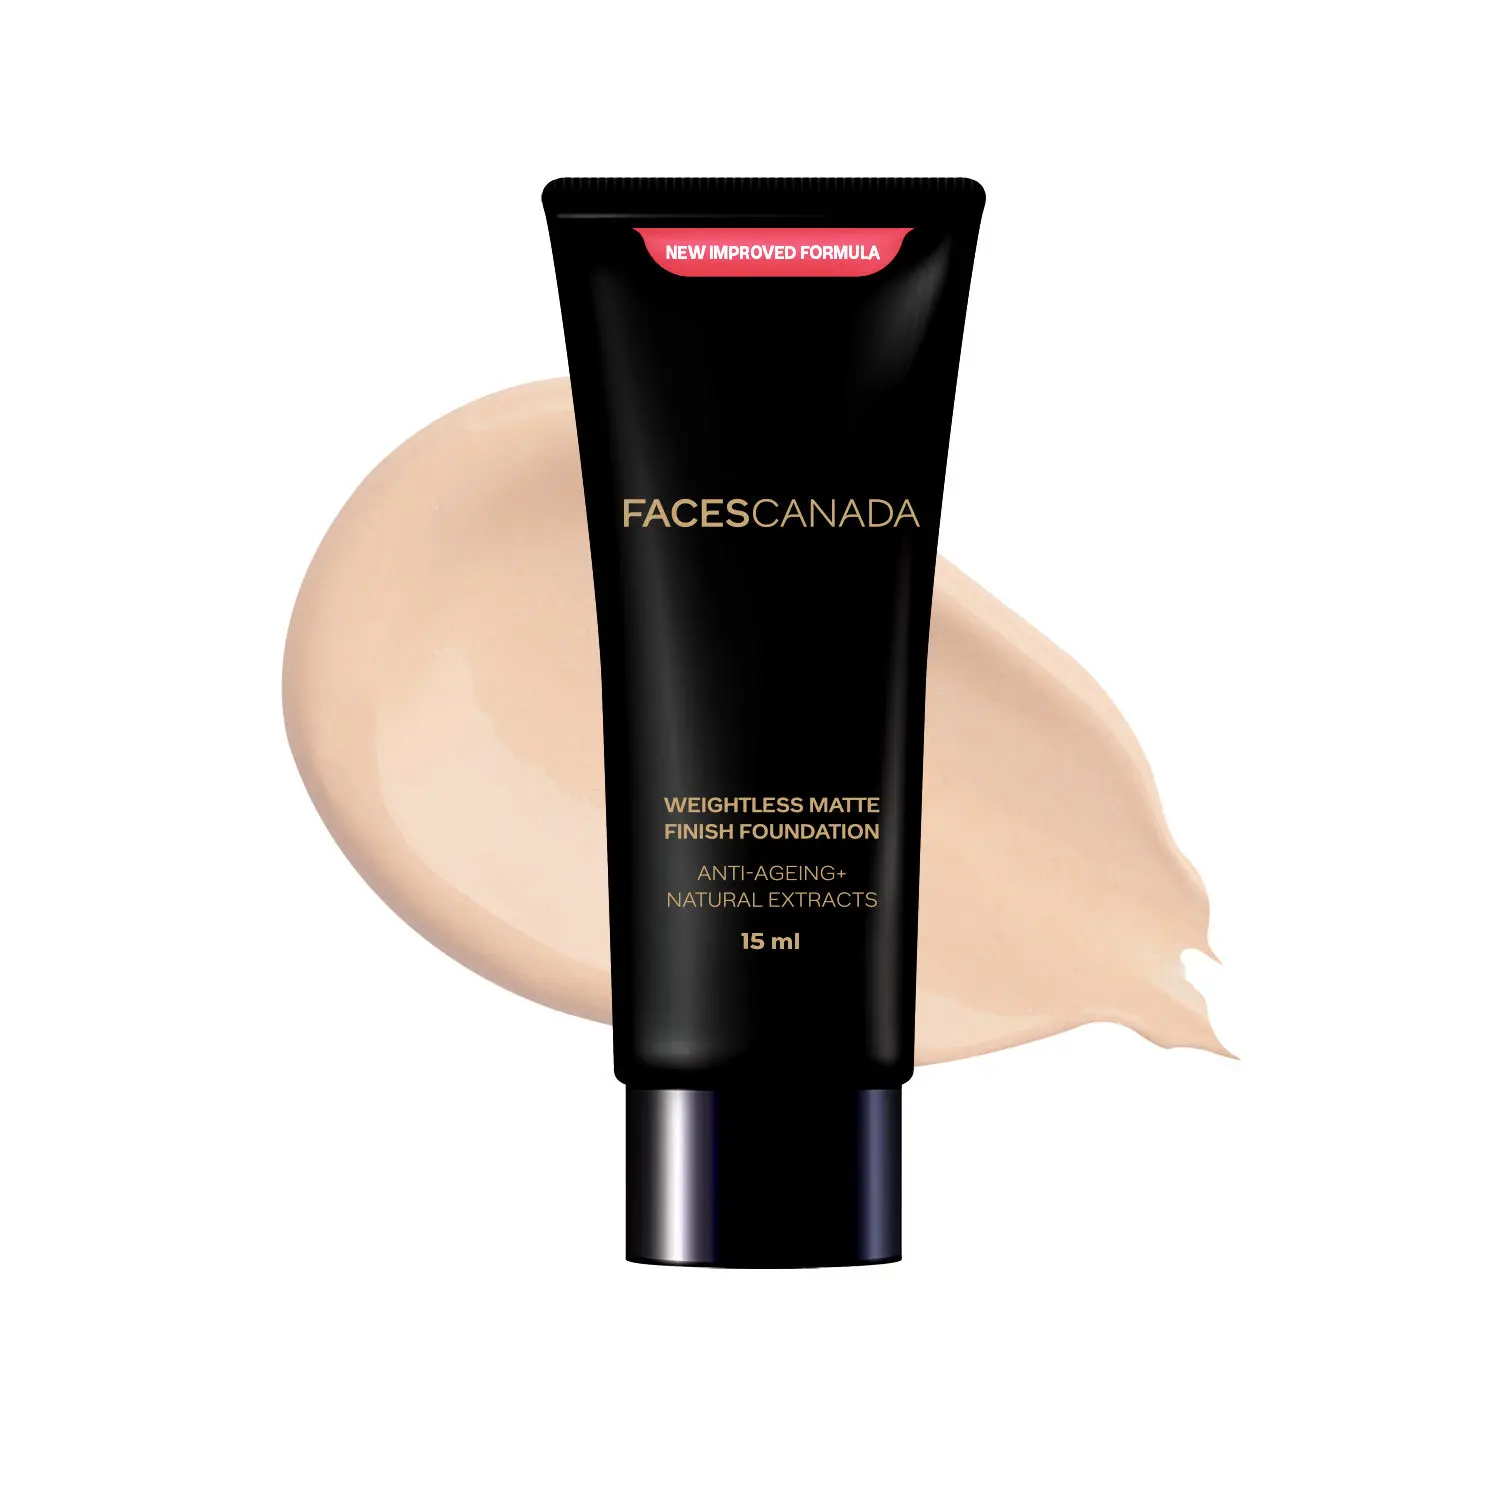 FACES CANADA Weightless Matte Finish Foundation Beige 05 15ml I Anti-ageing I Non-clog Pores I Lightweight I Olive Seed Oil I Grape Extract I Shea Butter I Cruelty-free I Paraben-free